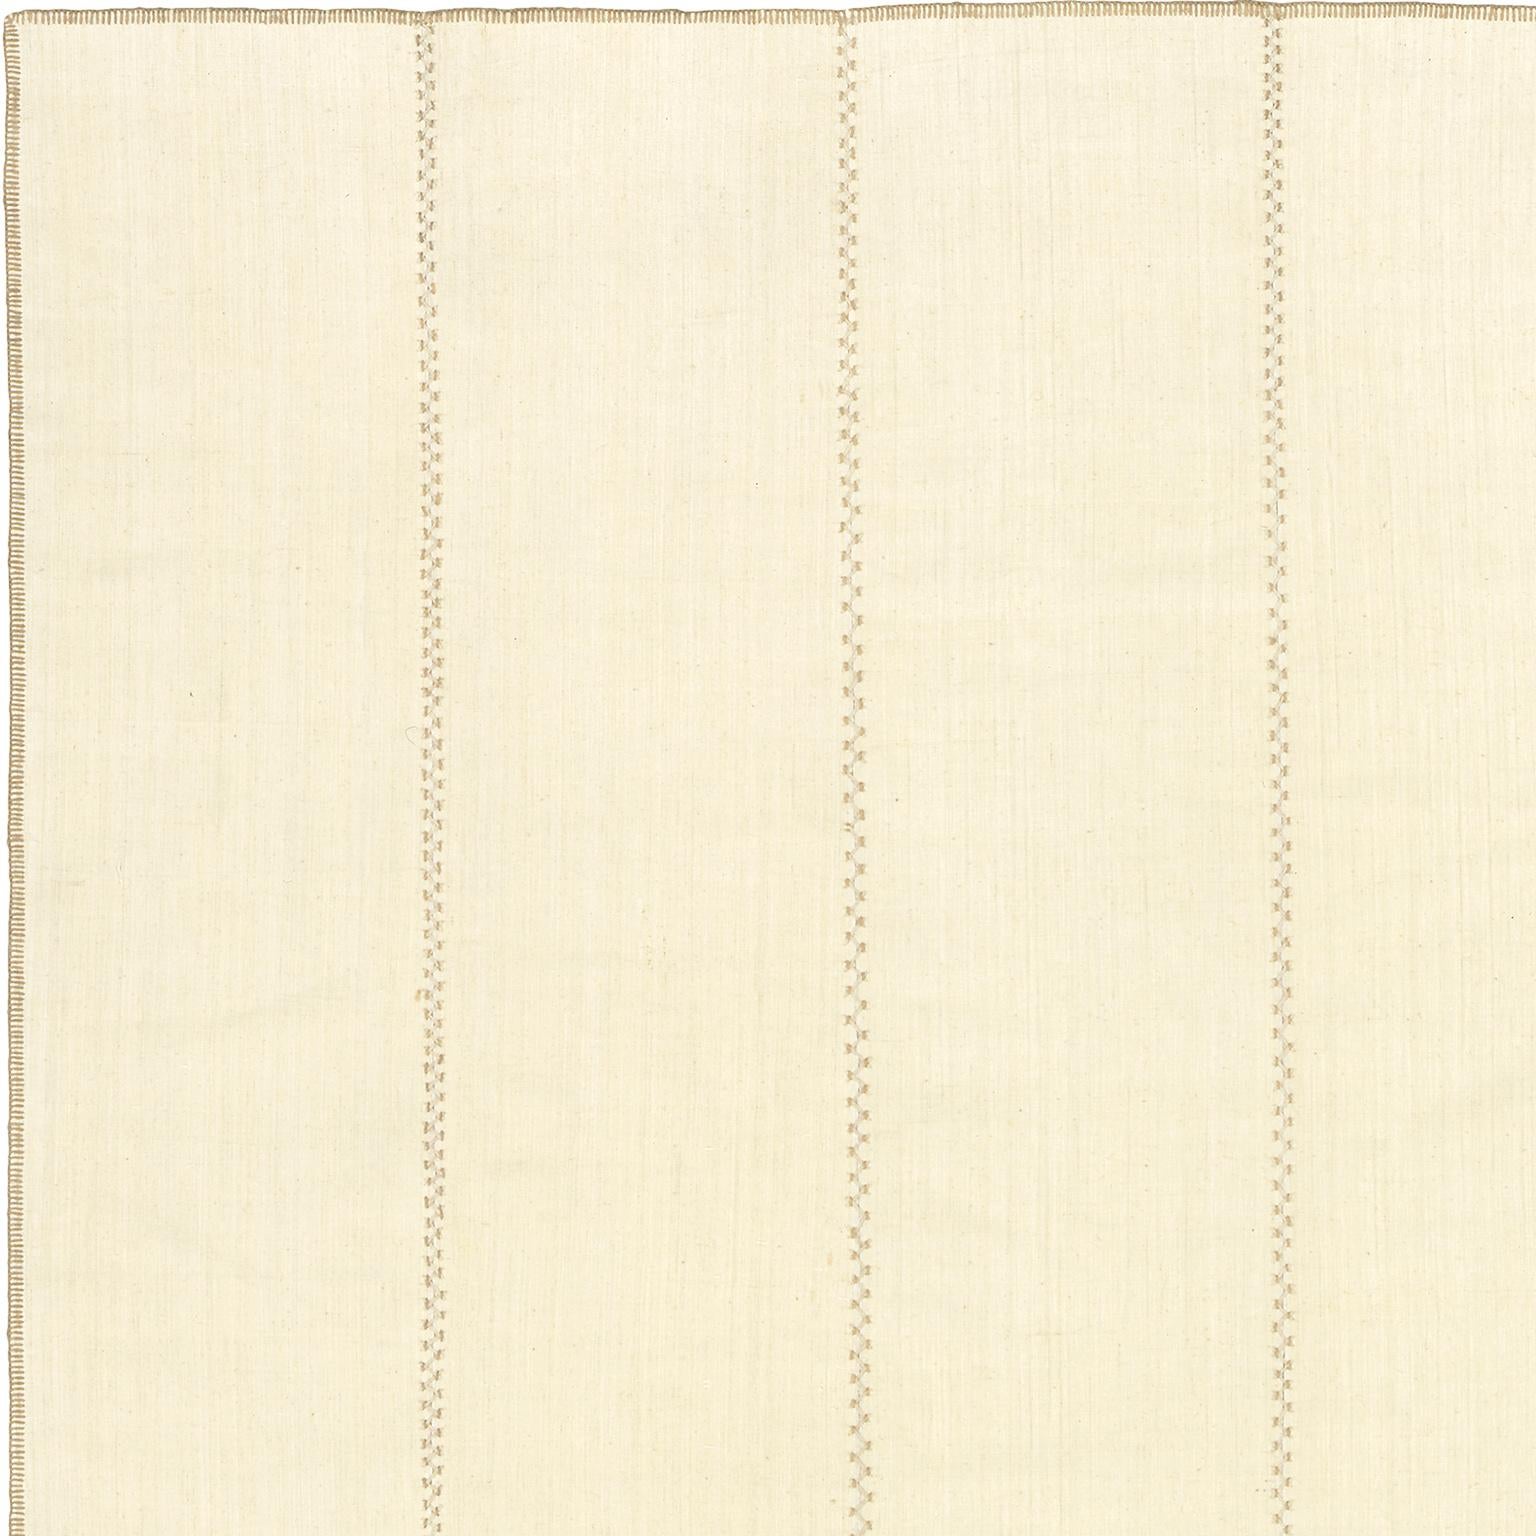 Linear design. Turkish cream colored panels with linen and wool stitching
Measures: 12'6